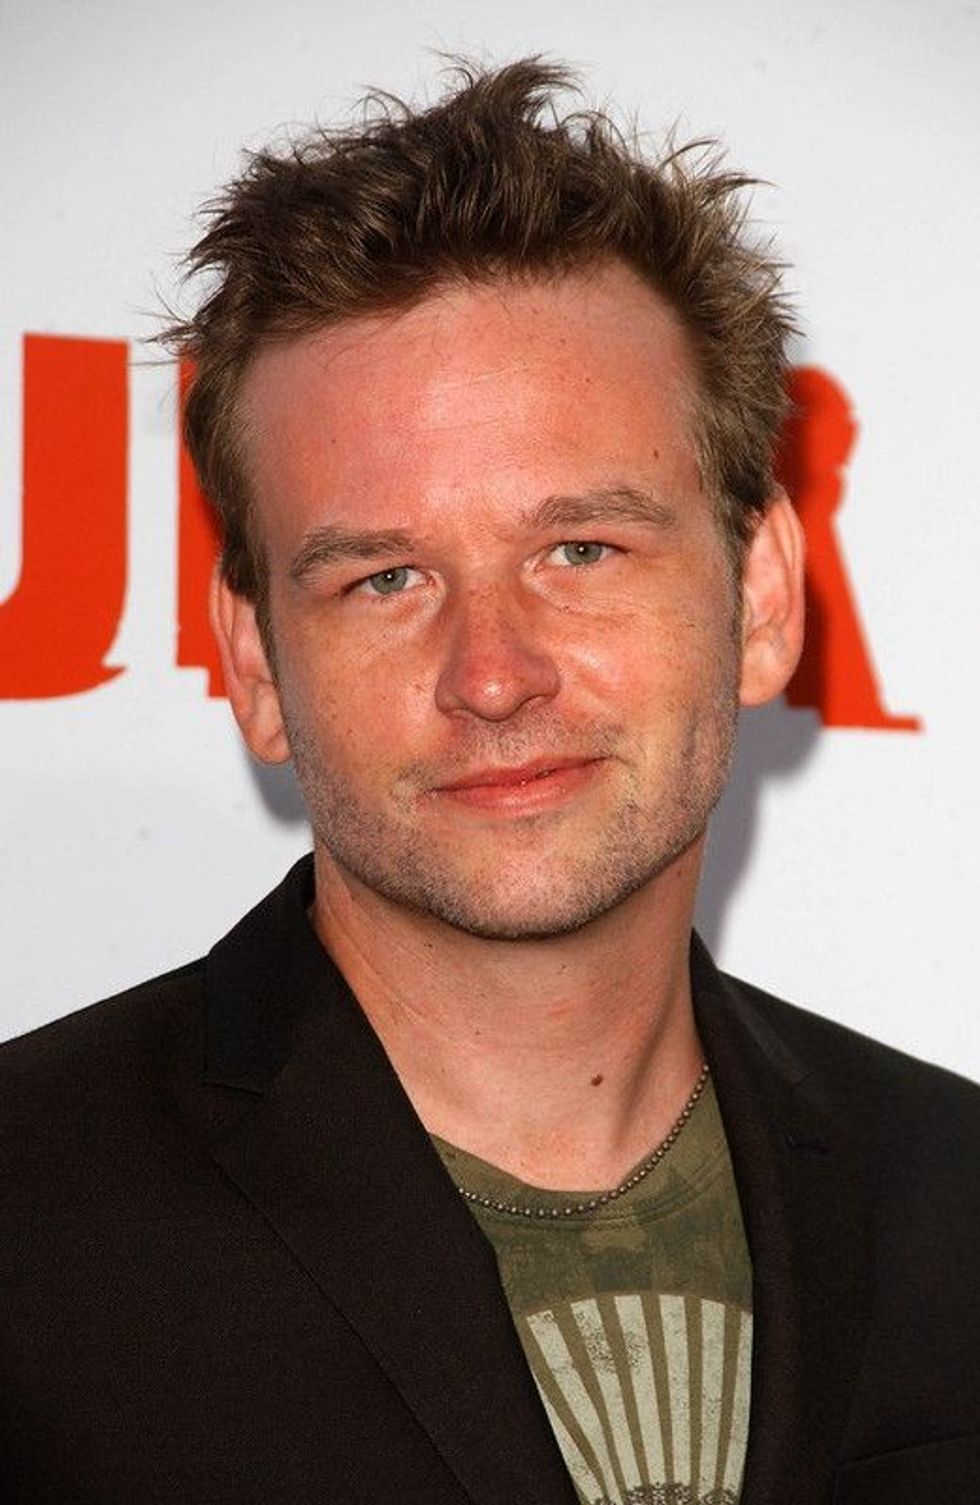 Dallas Roberts attends the Los Angeles premiere of '3:10 to Yuma' at the Mann National Theatre in Westwood, California.